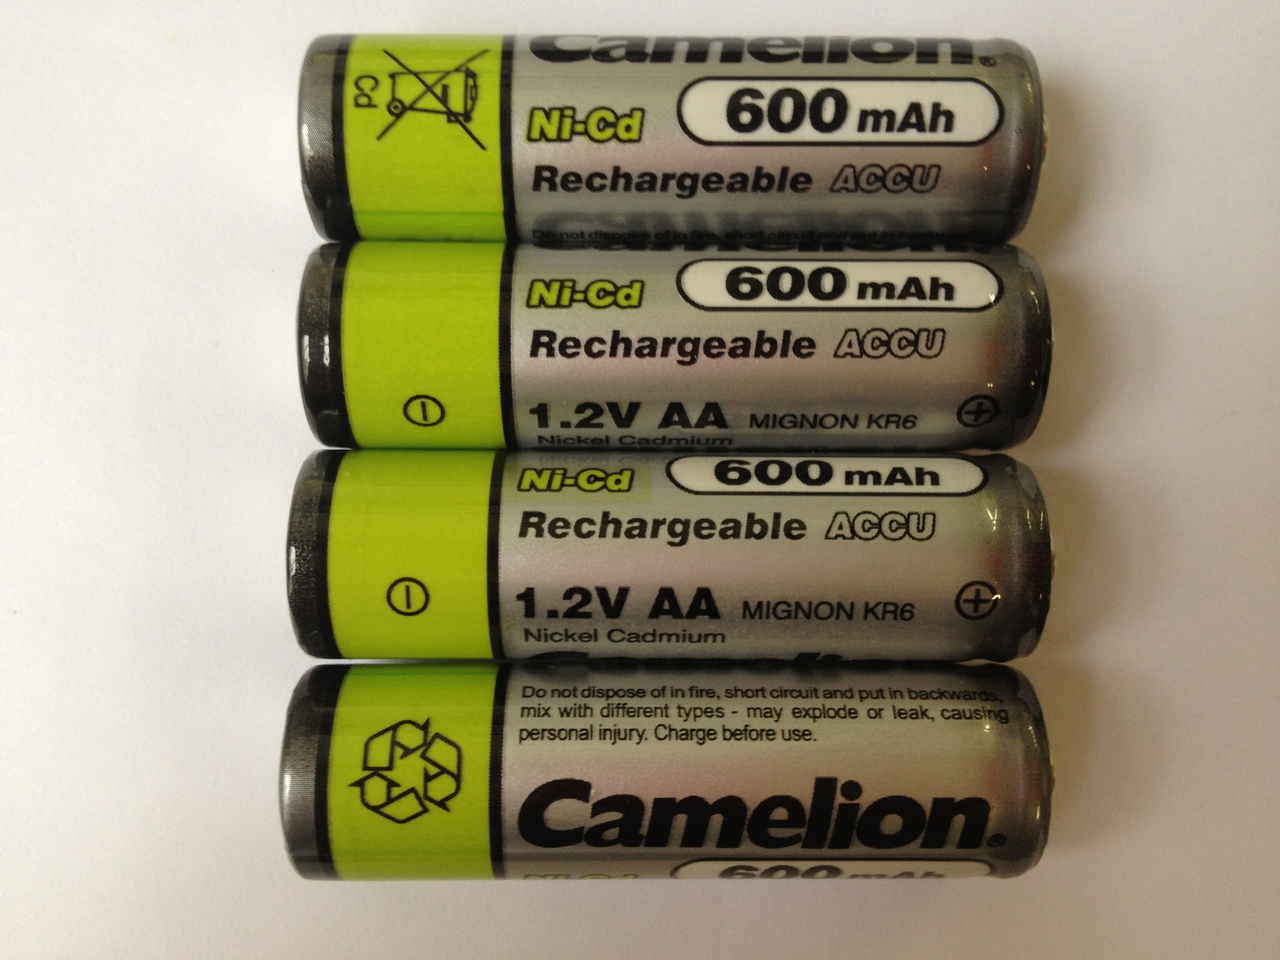 Camelion AA Rechargeable NiCD Batteries 600mAH 4 Pack + FREE SHIPPING!